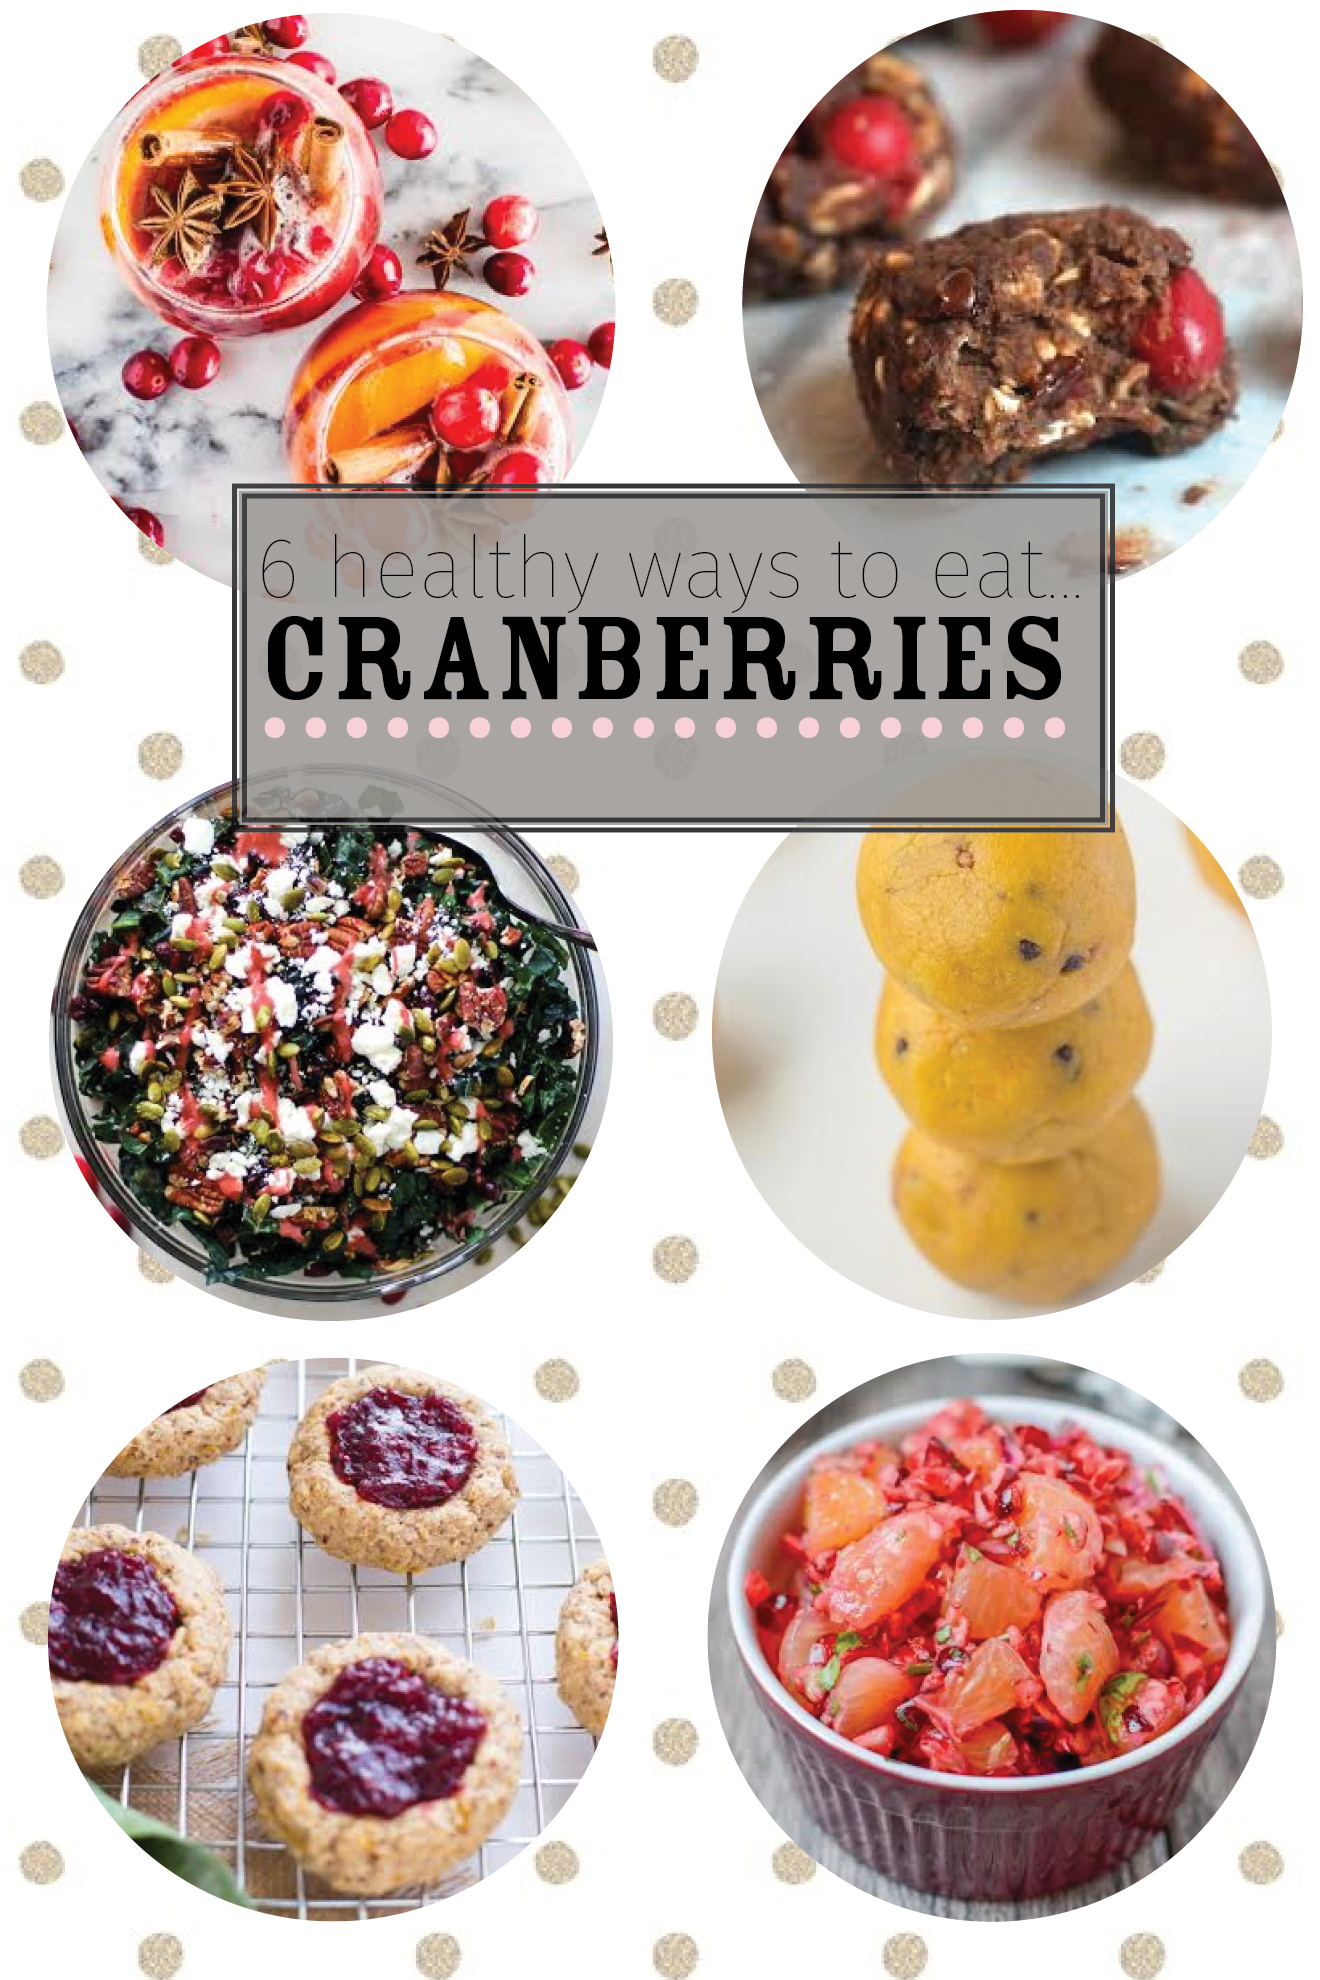 6 Healthy Ways to Eat Cranberries | immaEATthat.com